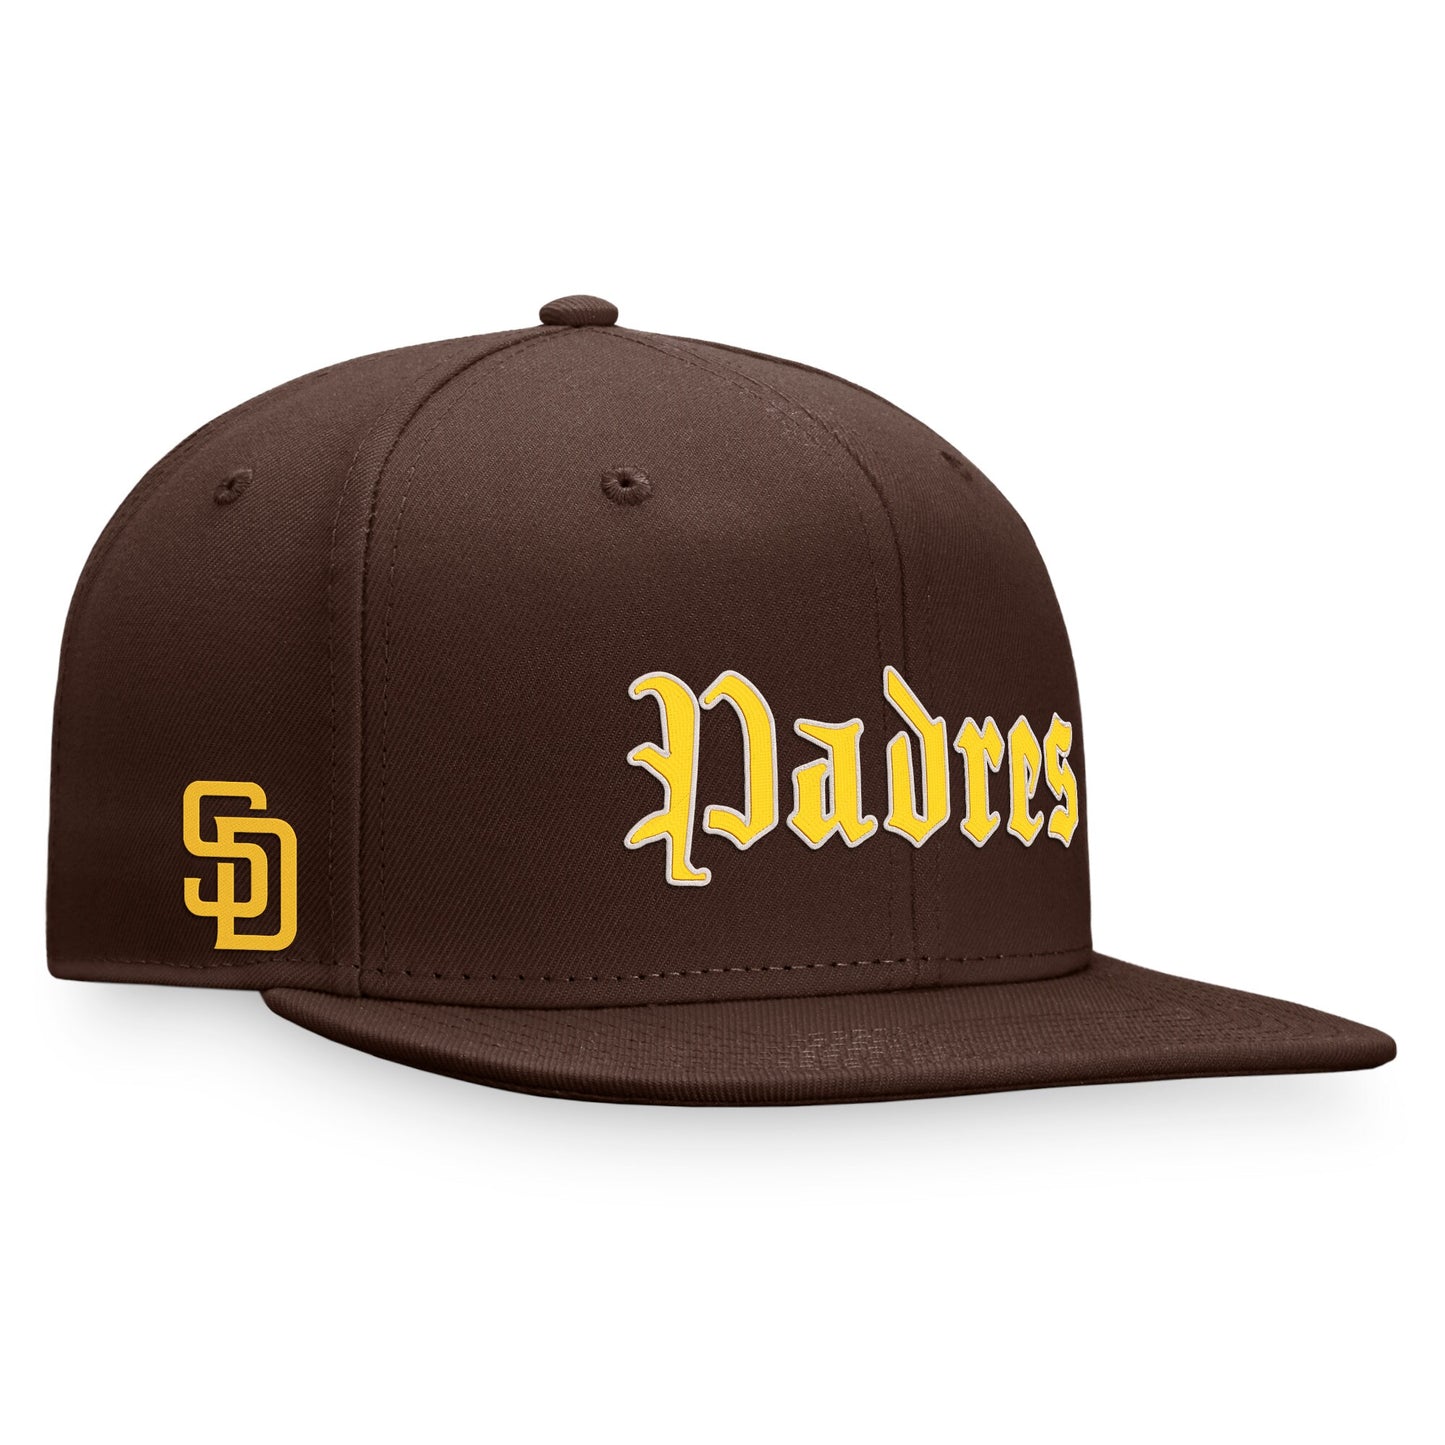 San Diego Padres Fanatics Branded Gothic Script Fitted Hat - Brown